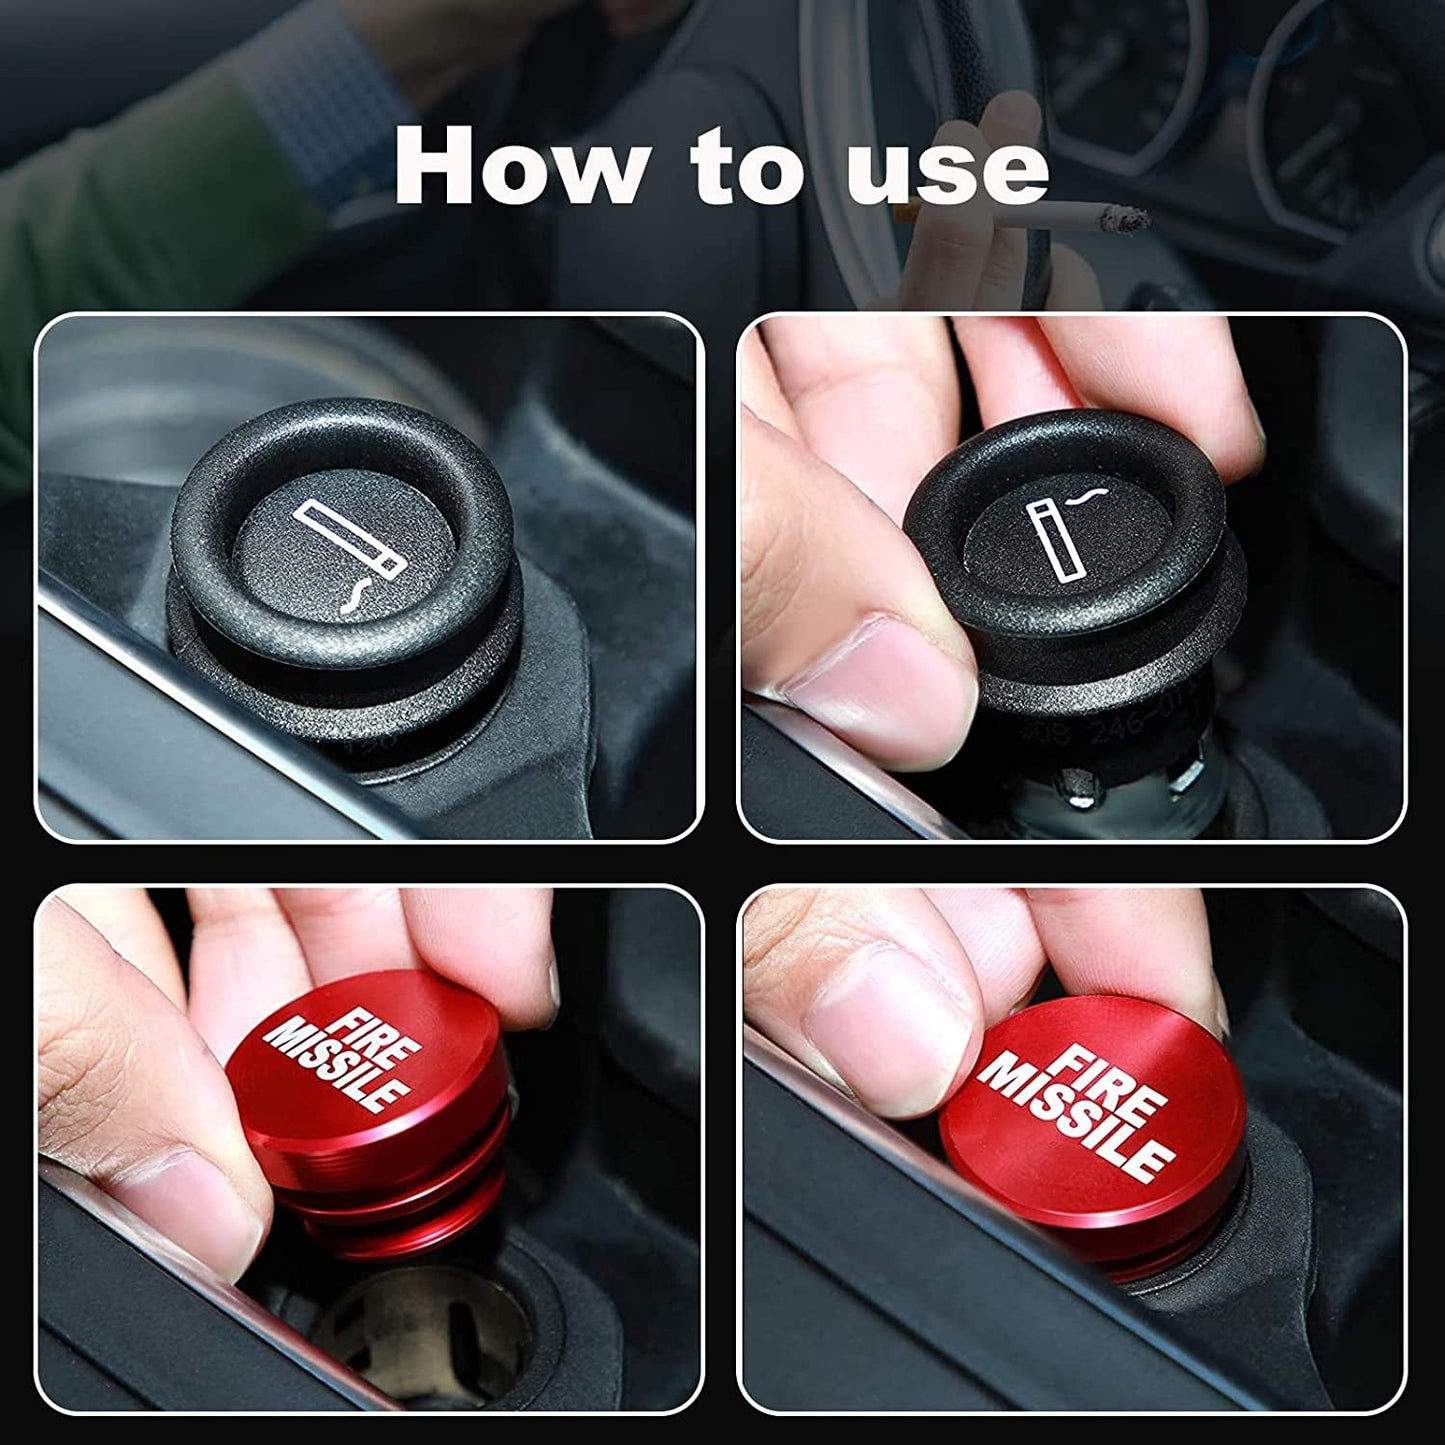 2 Pcs Car Cigarette Lighter Plug Cover Metal Cigarette Lighter Dustproof Plugs Cigarette Lighter Cover Cap Replacement Accessory for Most Automotive Vehicle Accessories (Red) - FoxMart™️ - Xinjieda